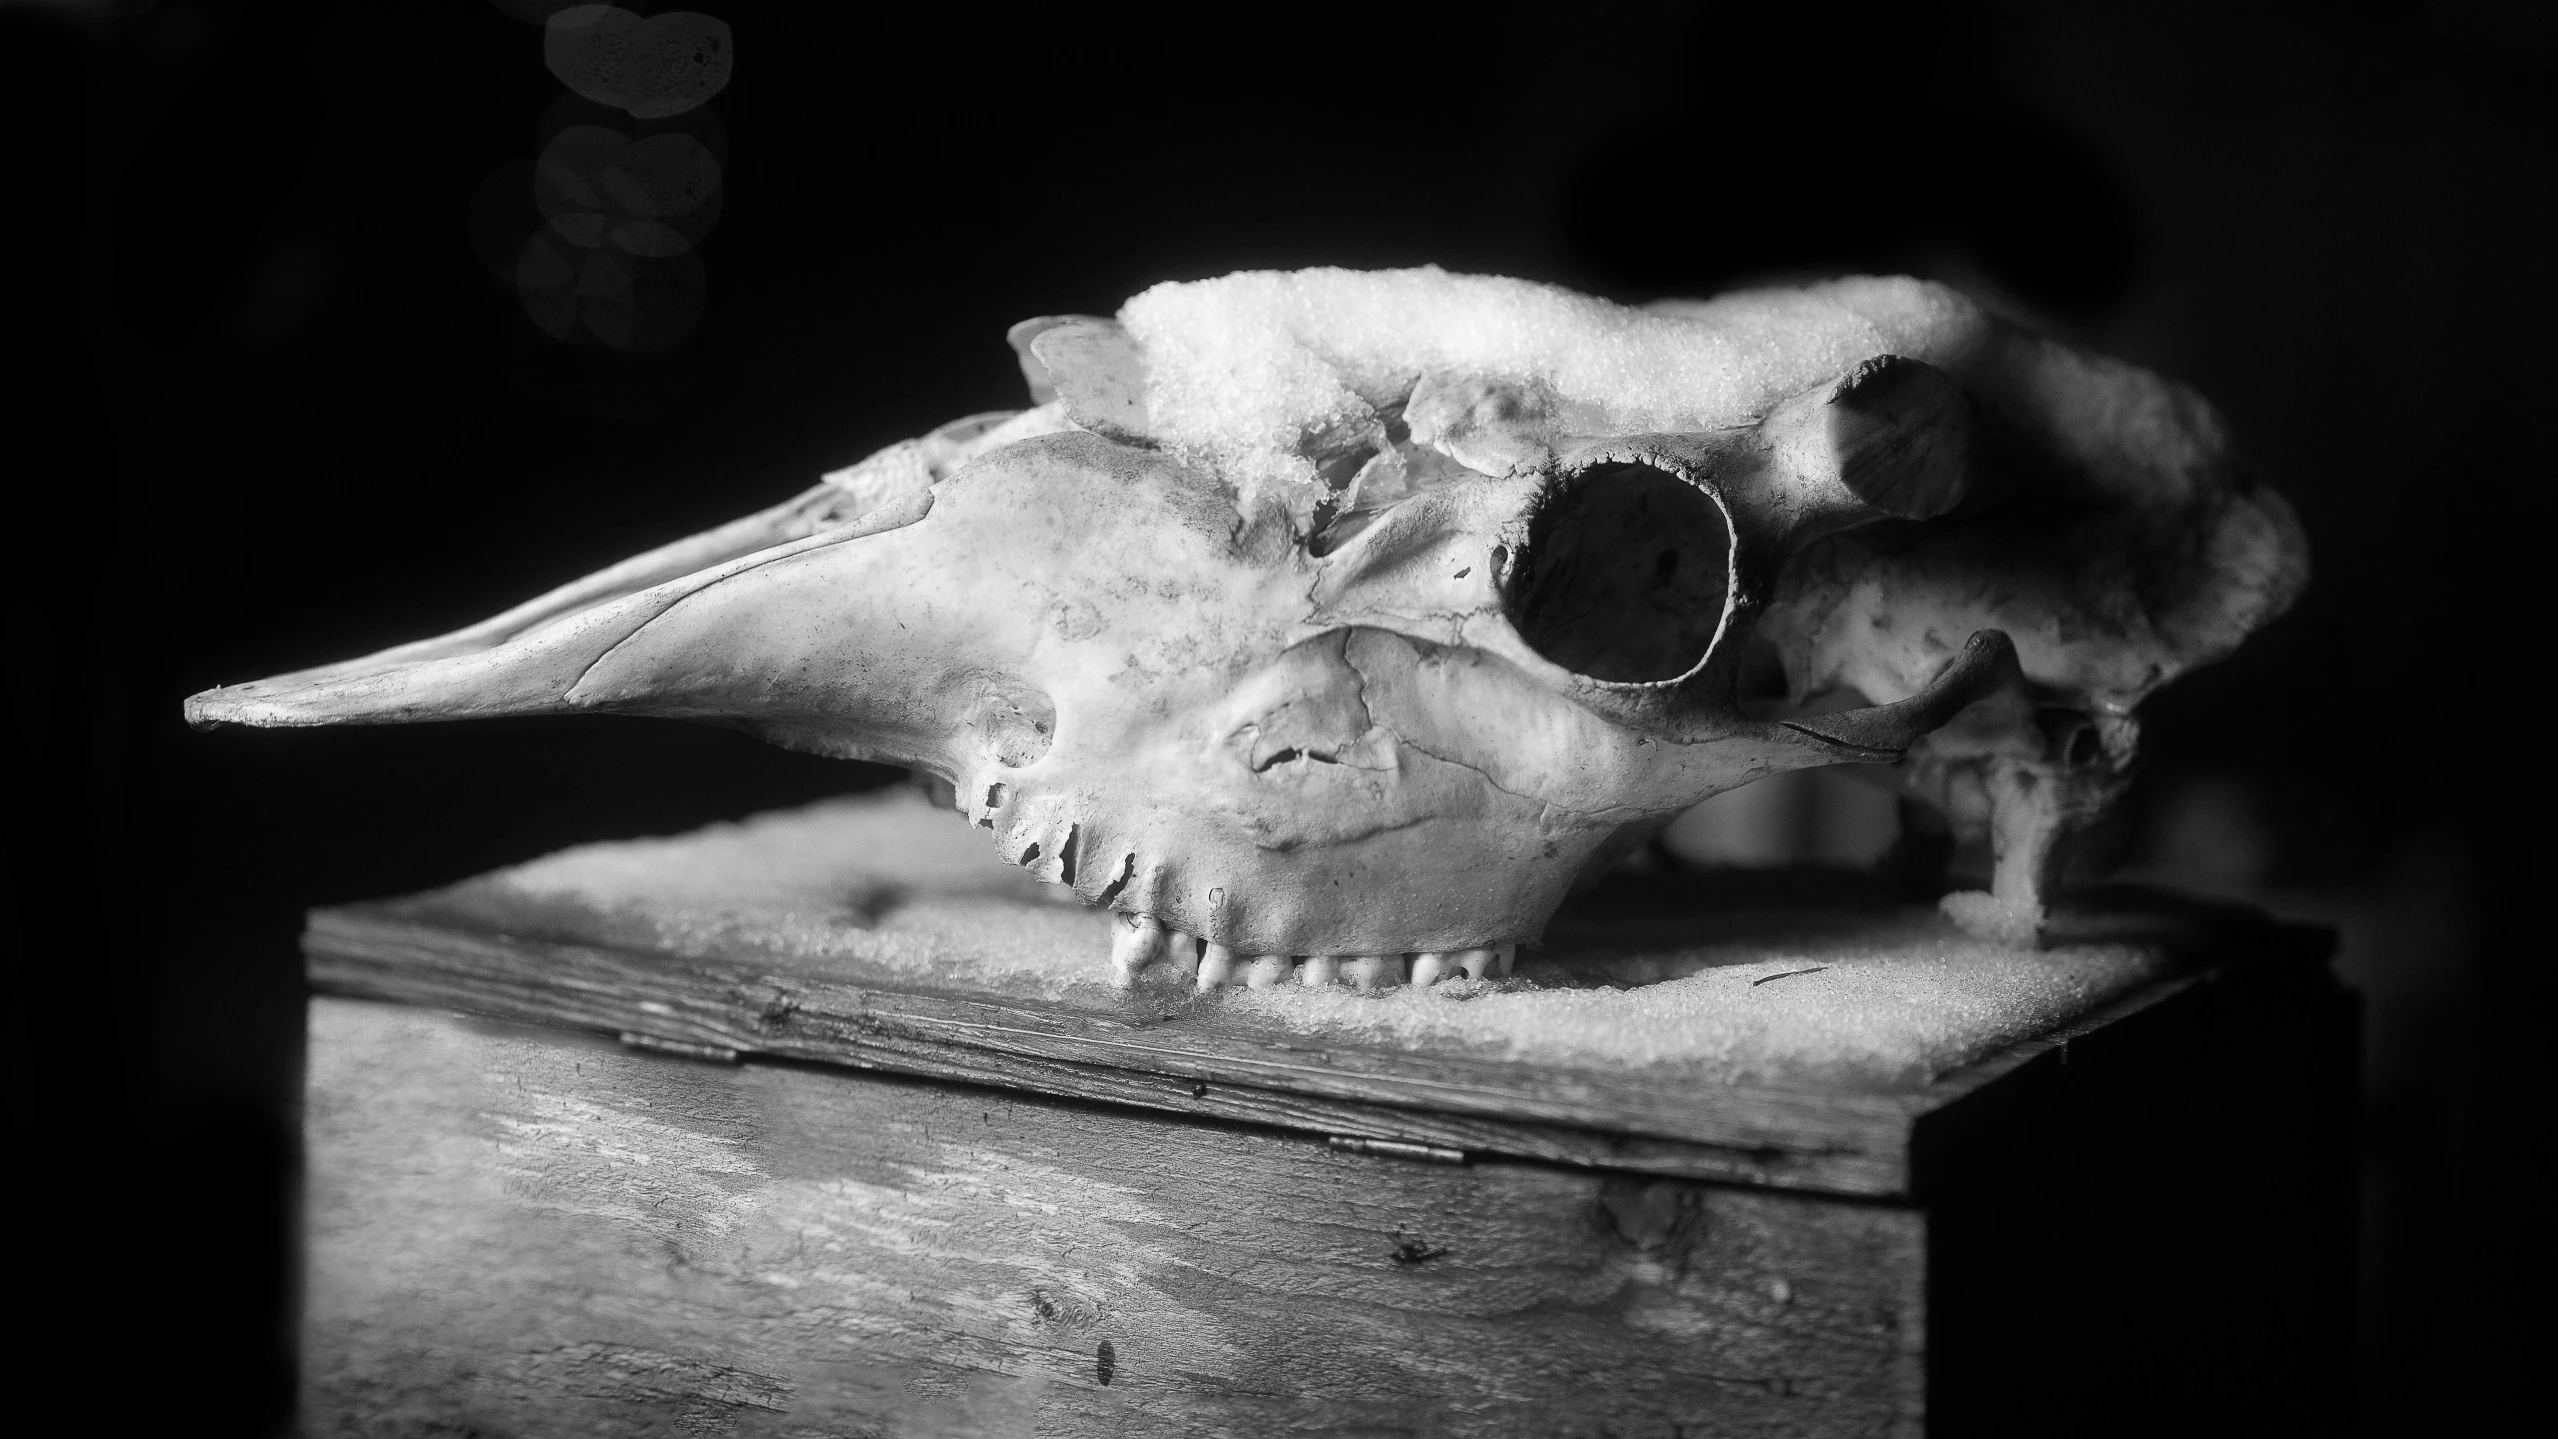 there is a fake animal skull on top of the table